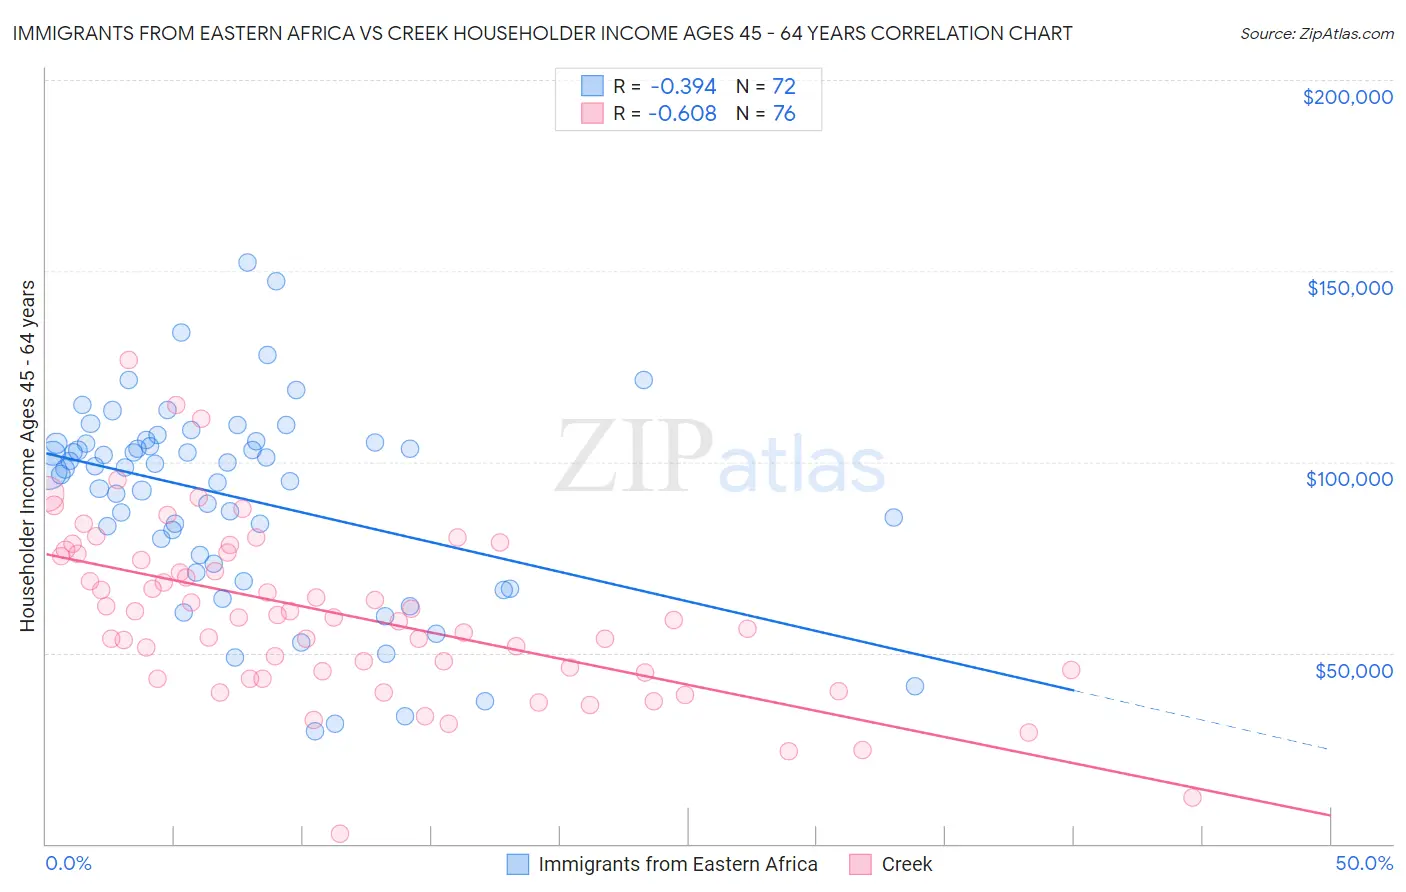 Immigrants from Eastern Africa vs Creek Householder Income Ages 45 - 64 years